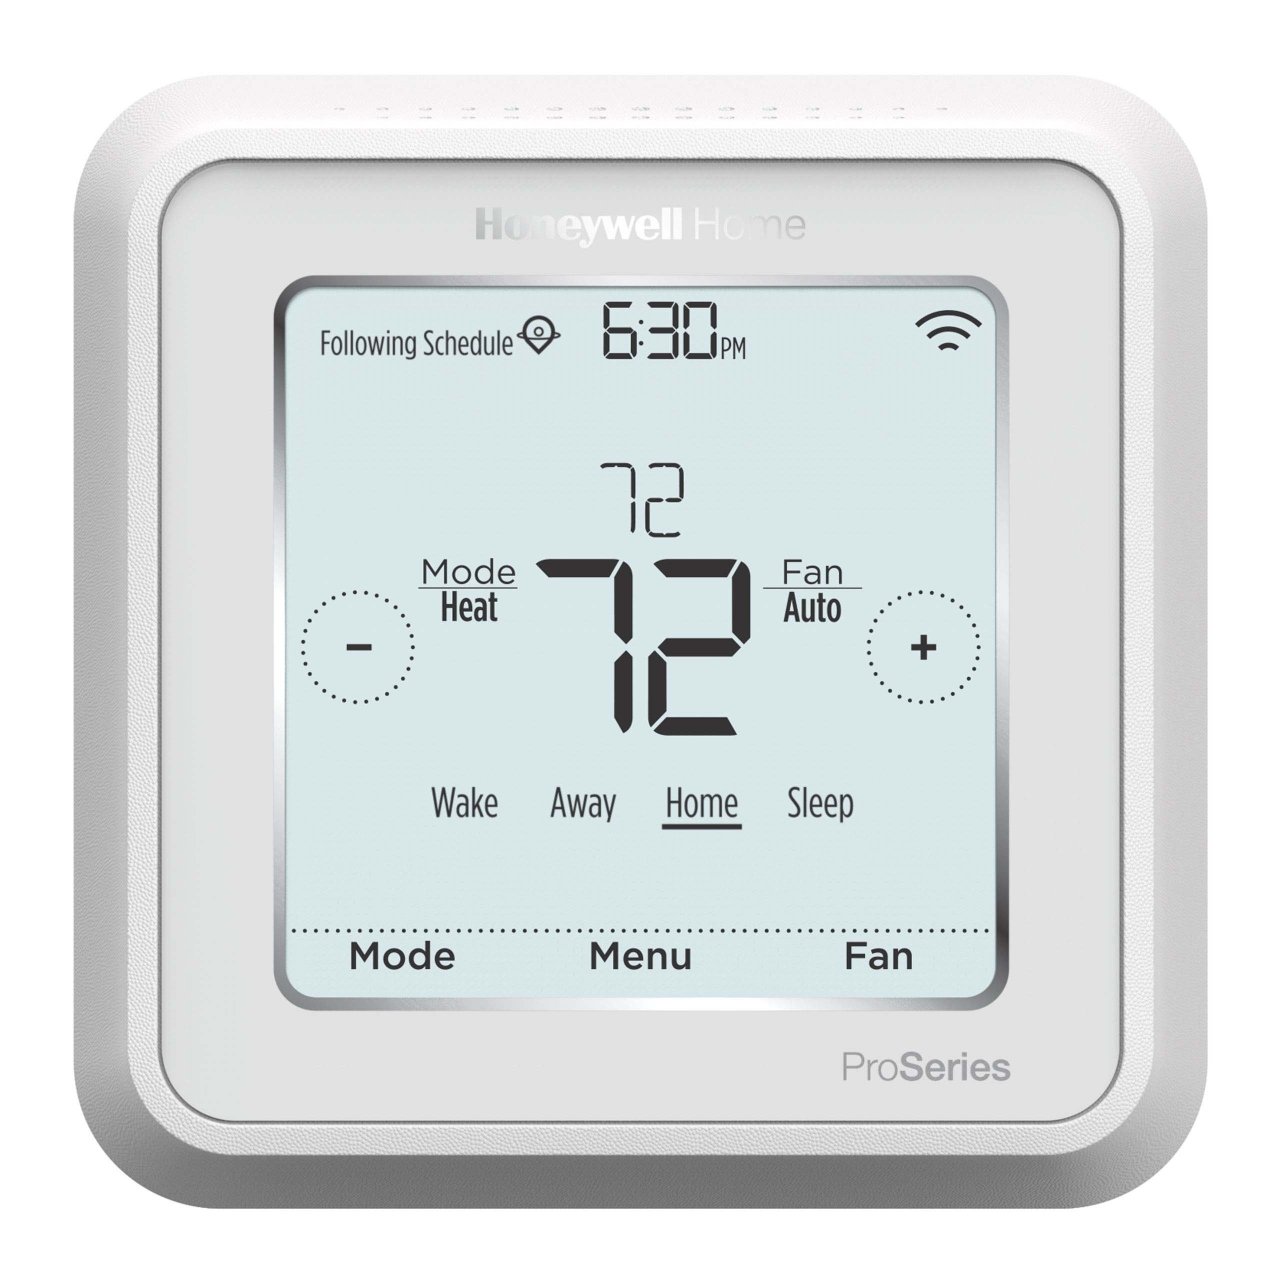 How To Program The Honeywell T6 Pro Smart Thermostat